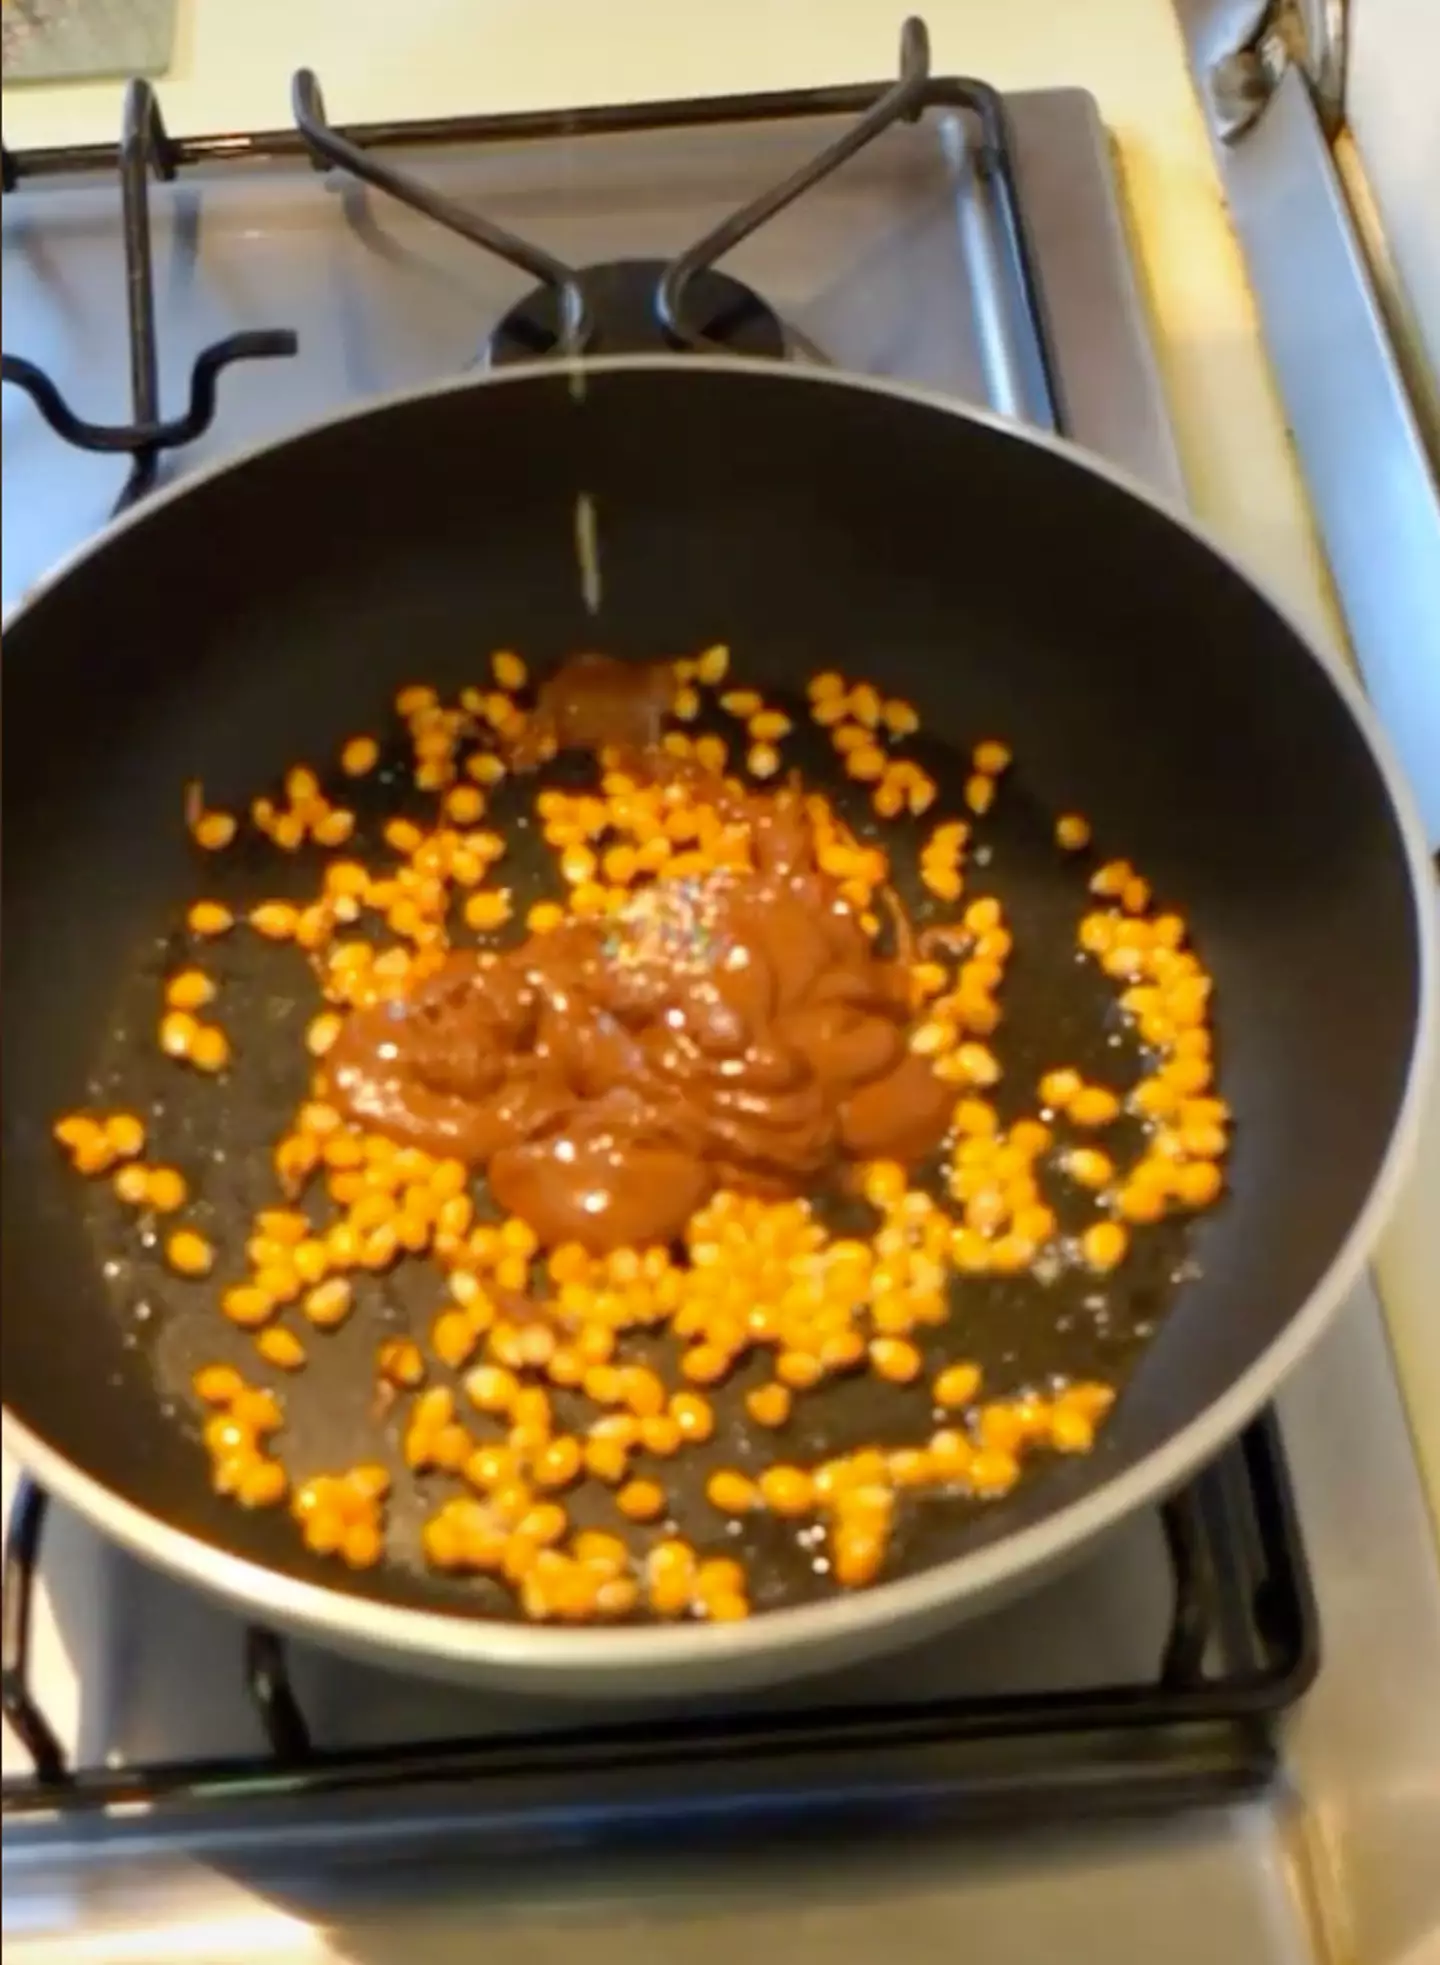 Add Nutella and your popcorn kernels to the frying pan. (